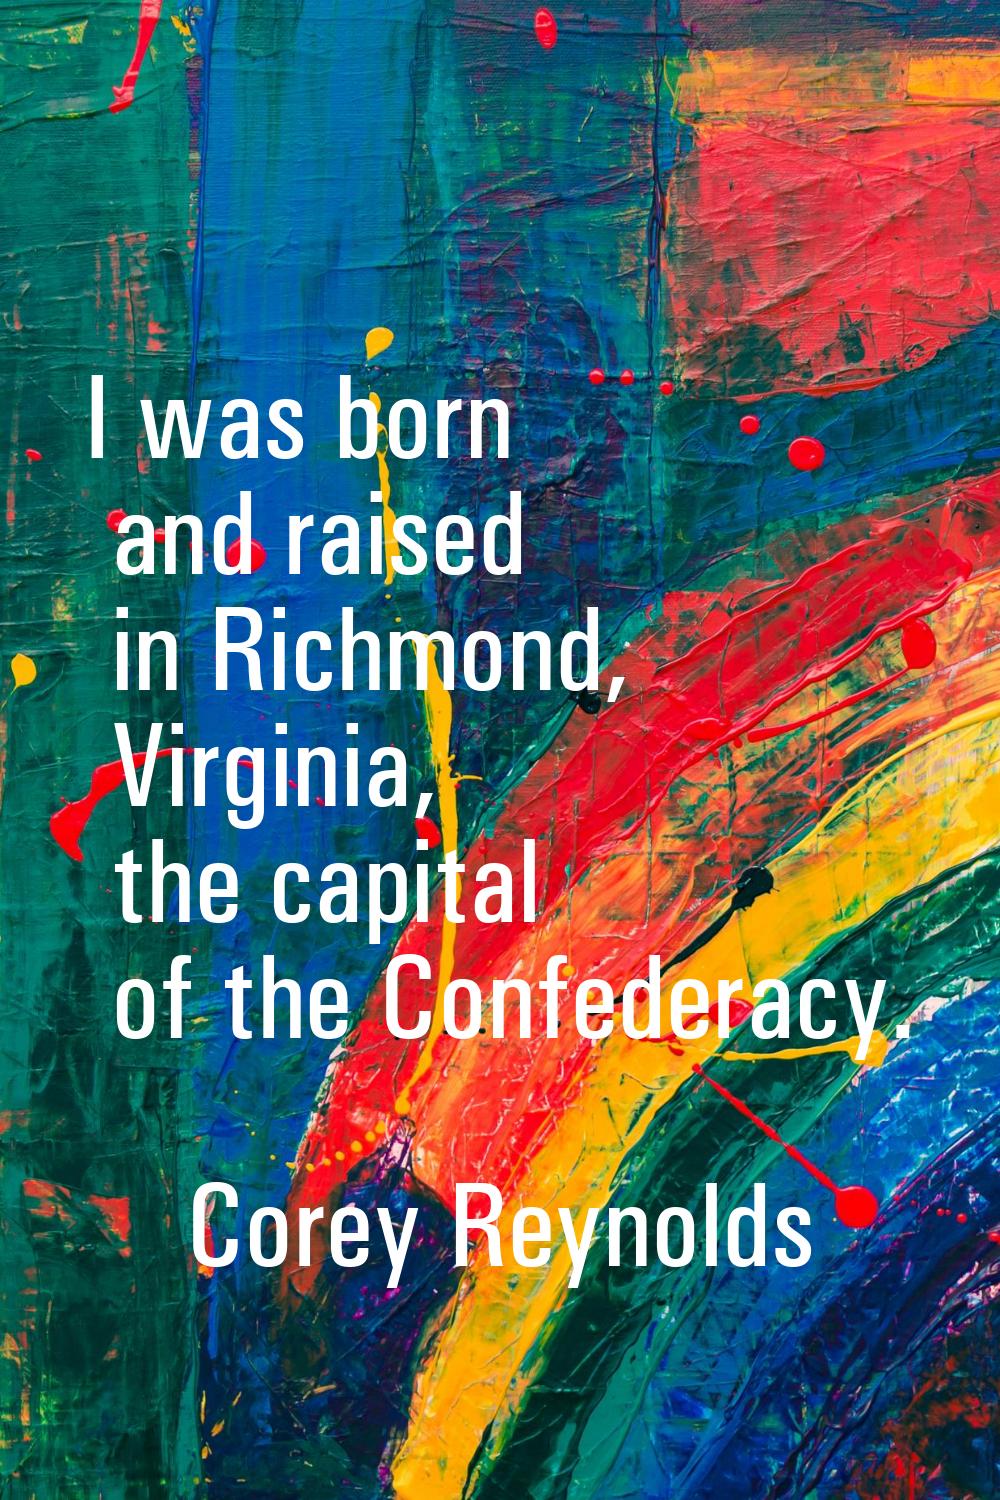 I was born and raised in Richmond, Virginia, the capital of the Confederacy.